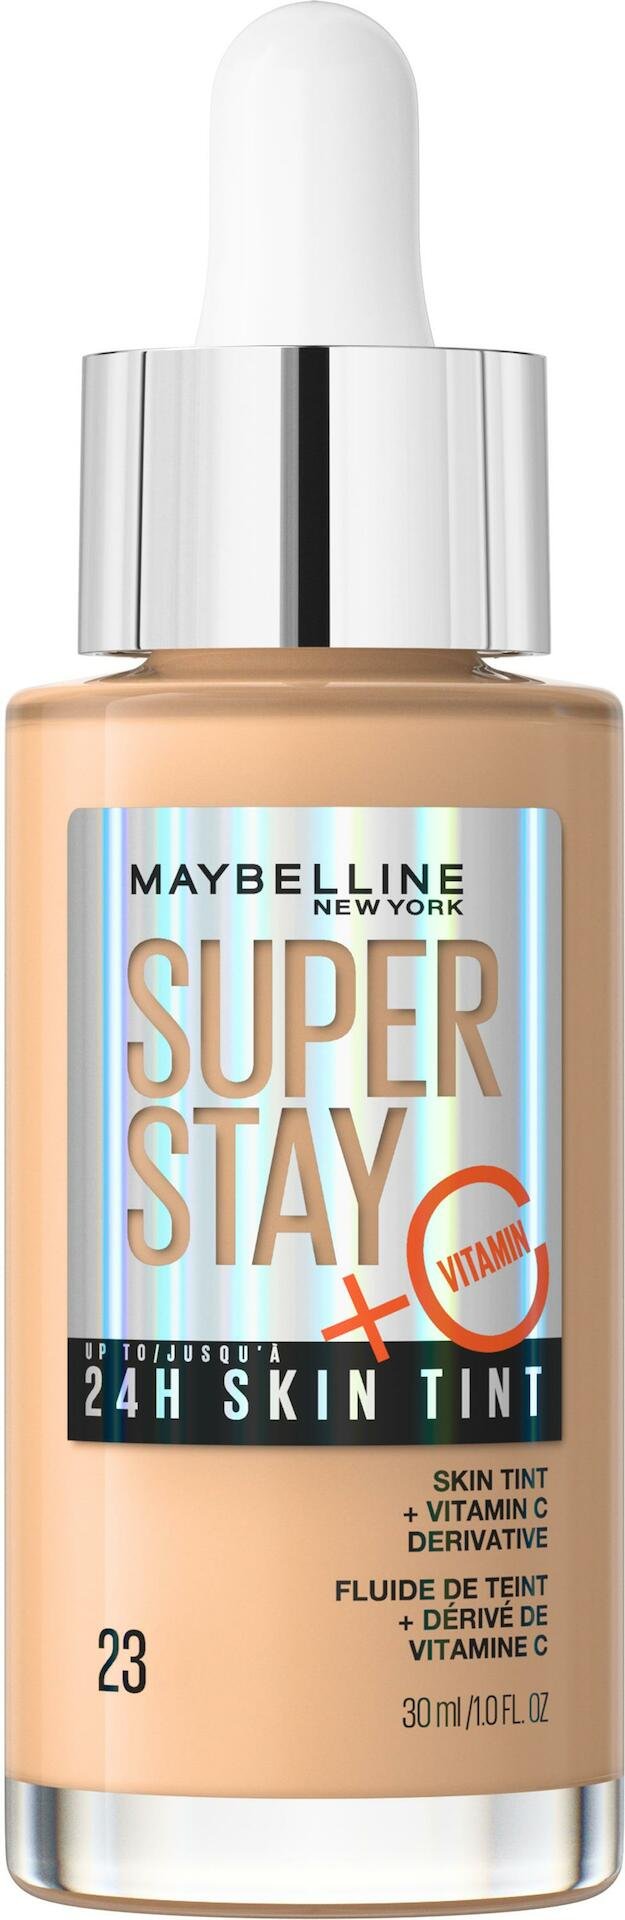 Maybelline New York Superstay 24H Skin Tint Foundation 23